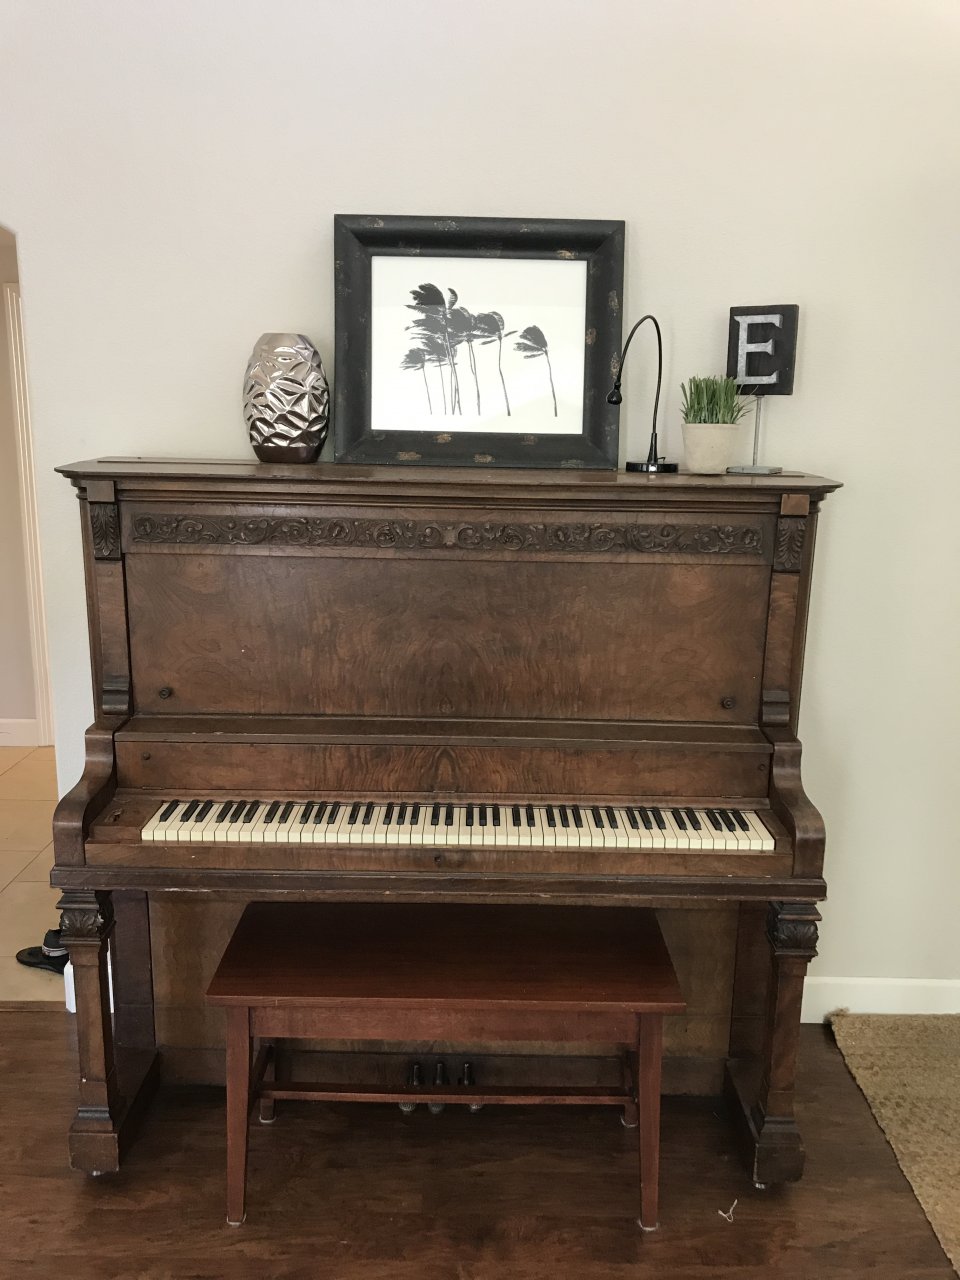 We Have An Emerson Swing Desk Upright Piano That Has Been In Our